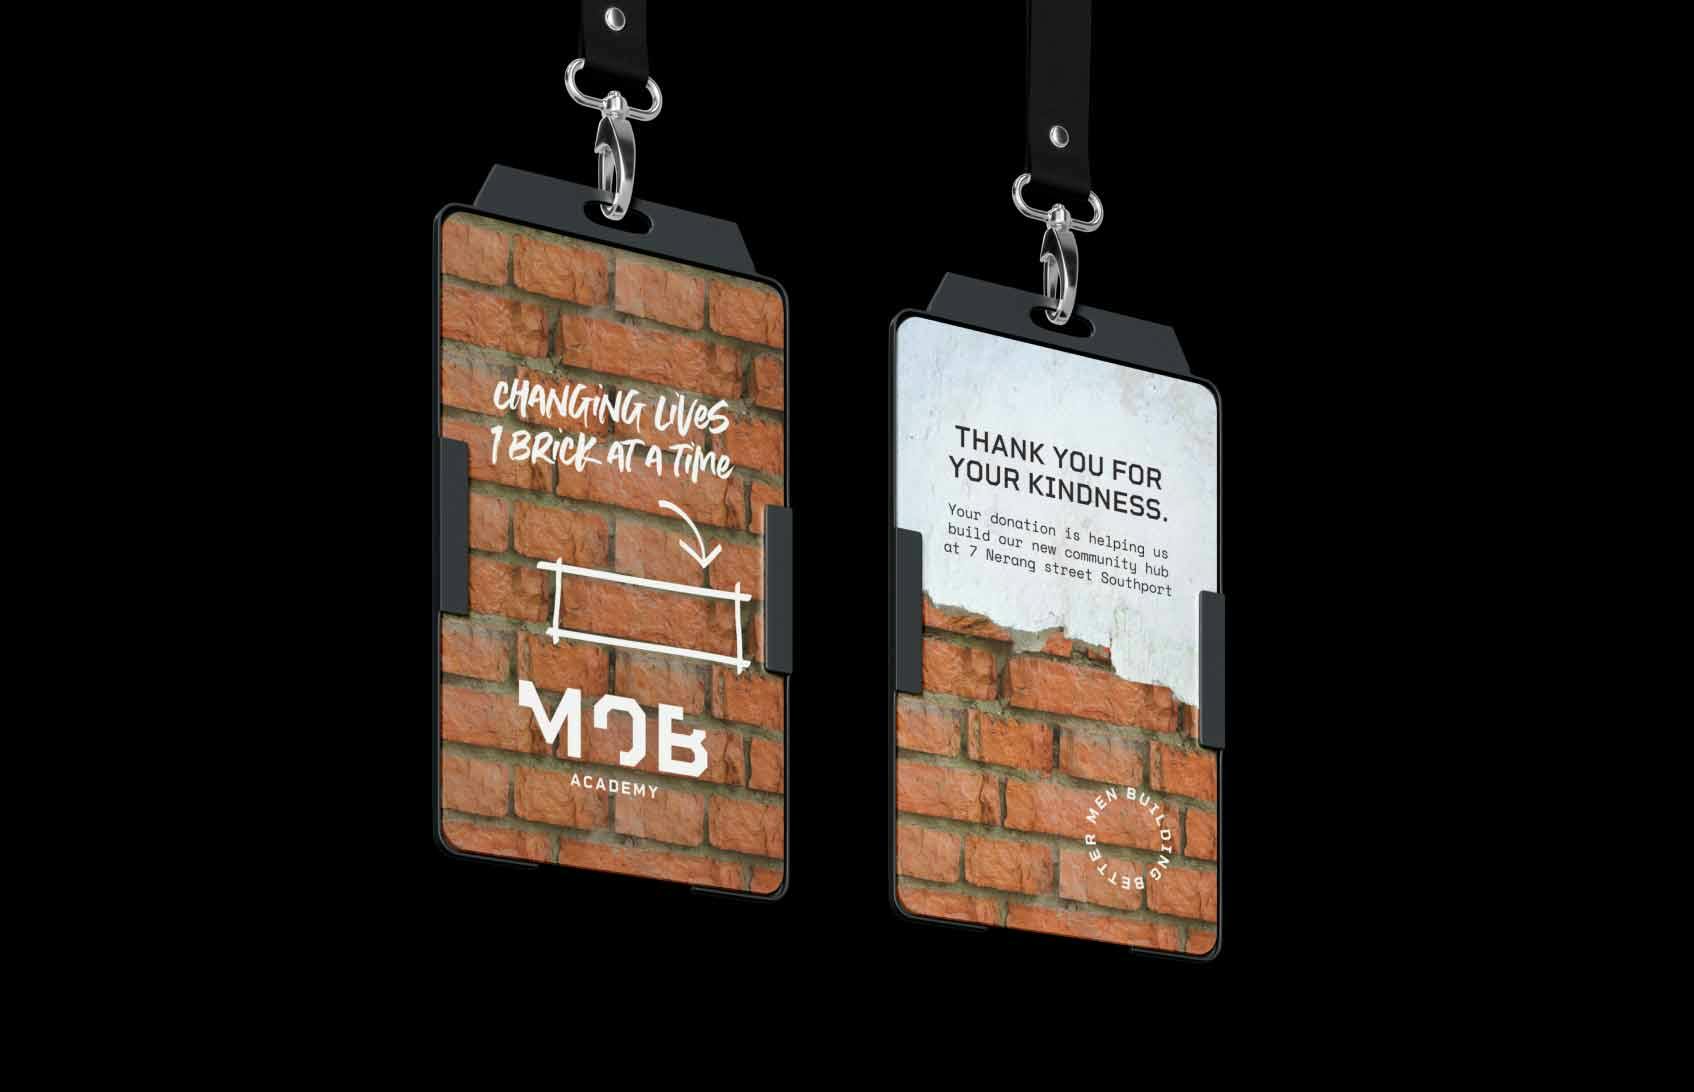 A mockup of a Men of Business Academy lanyard